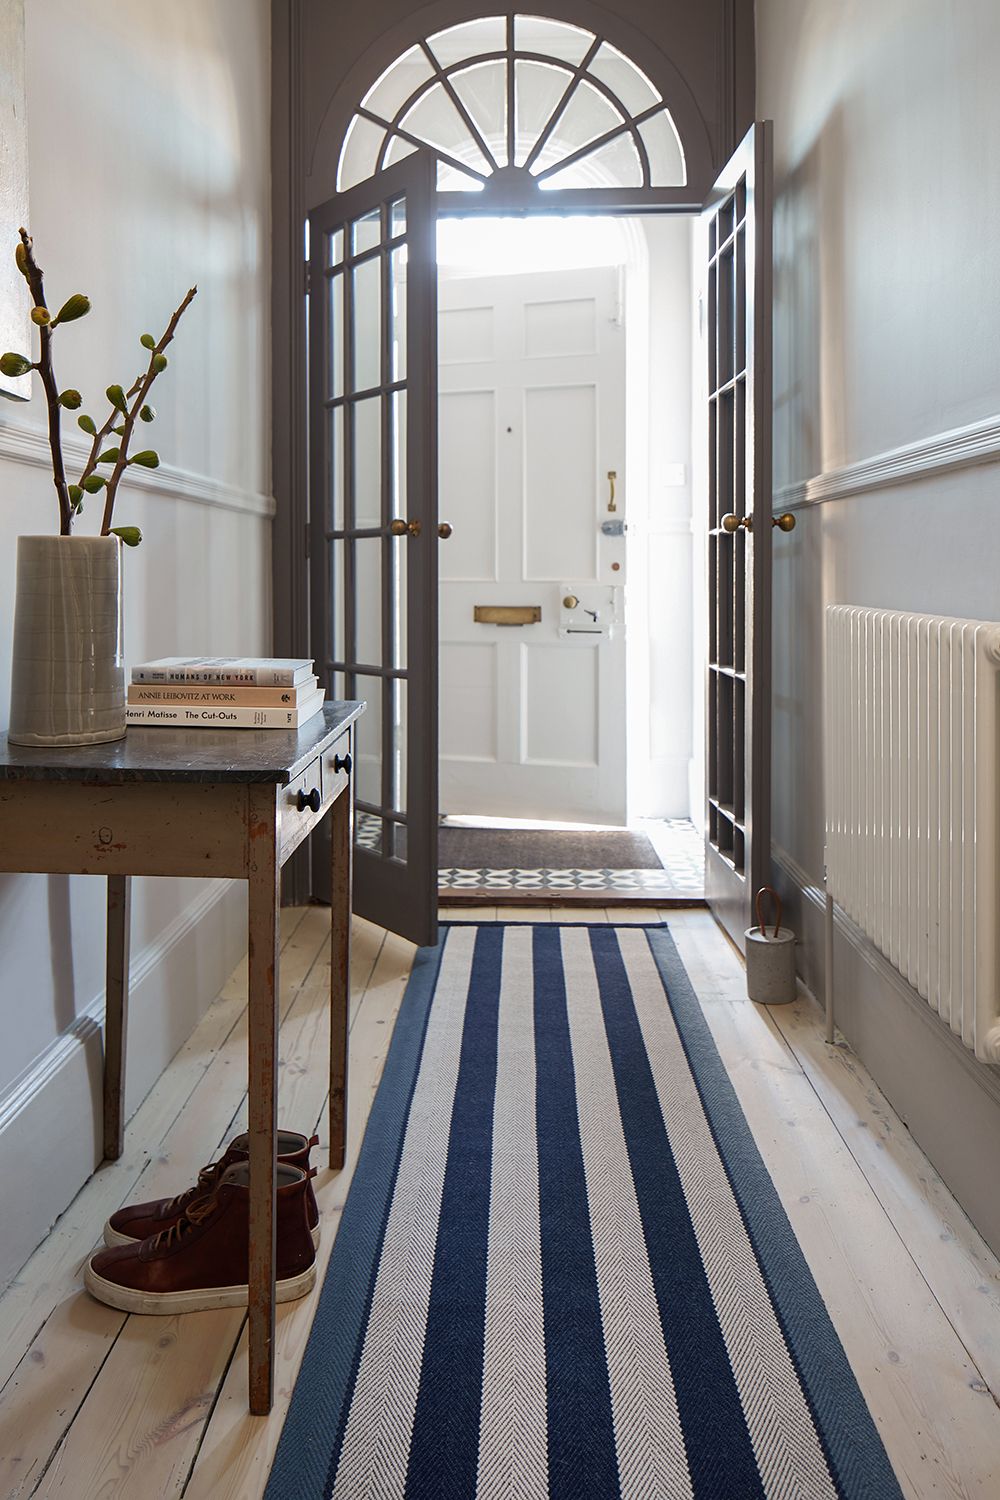 Hallway Rugs 10 Ideas To Add Style, Runner Rugs For Hallway